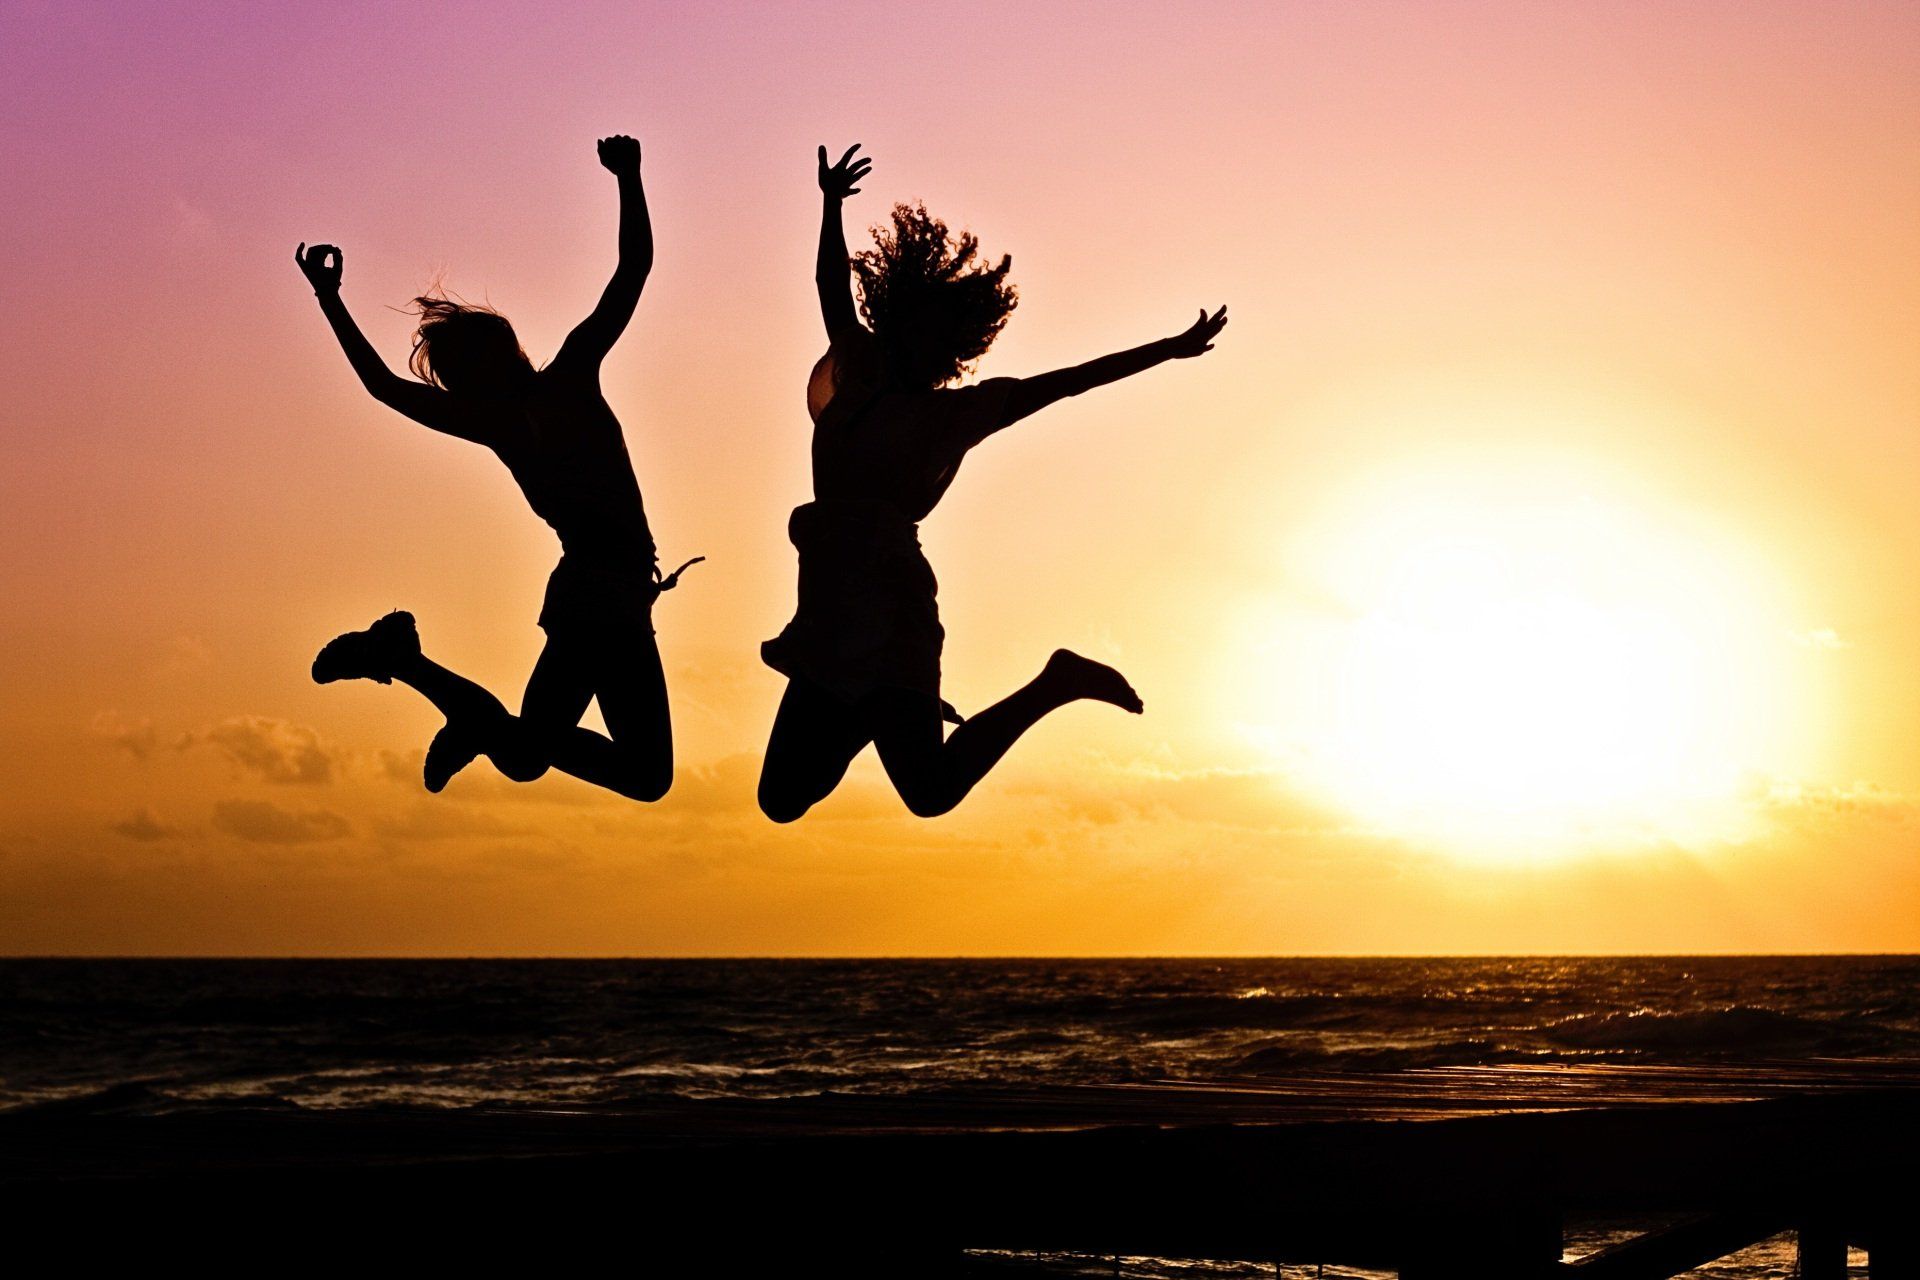 Two people jumping for joy in the sunset